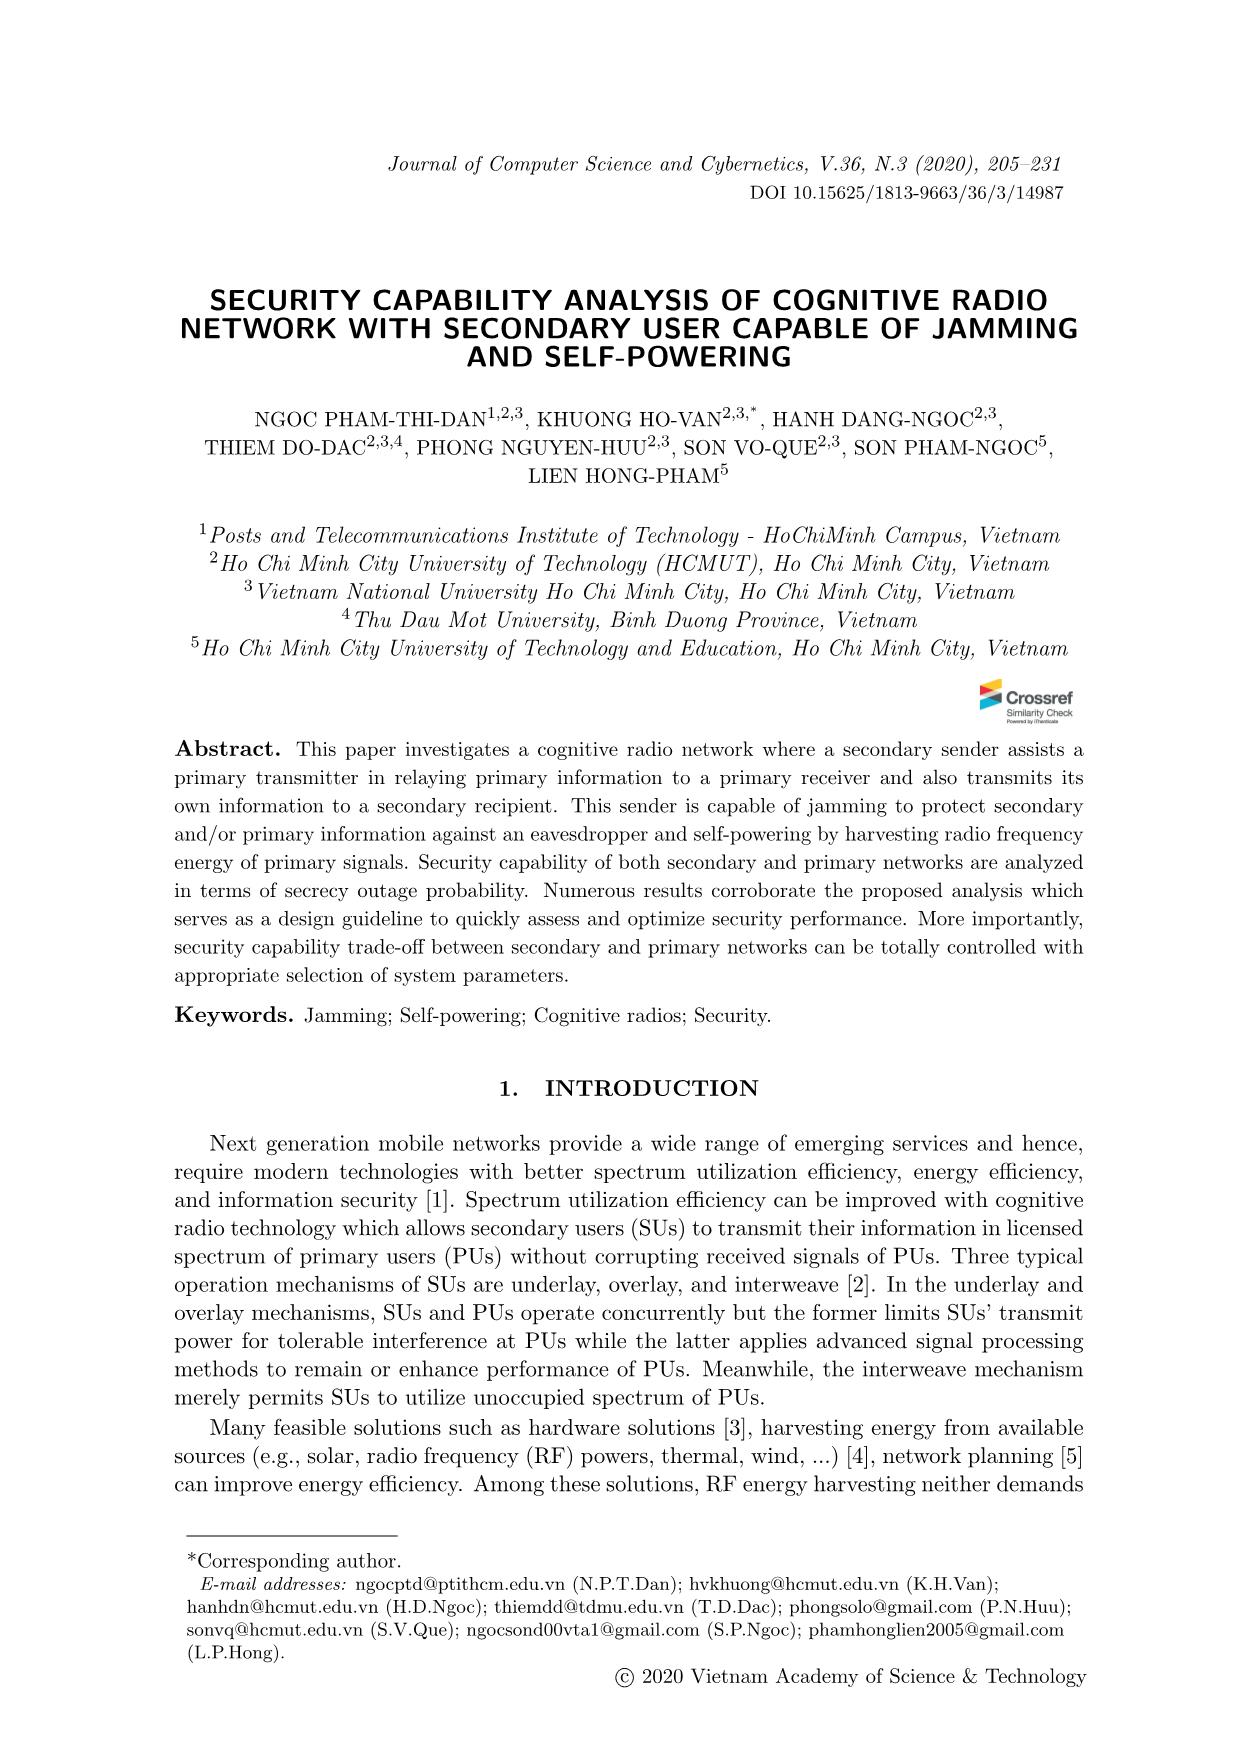 Security capability analysis of cognitive radio network with secondary user capable of jamming and self-powering trang 1